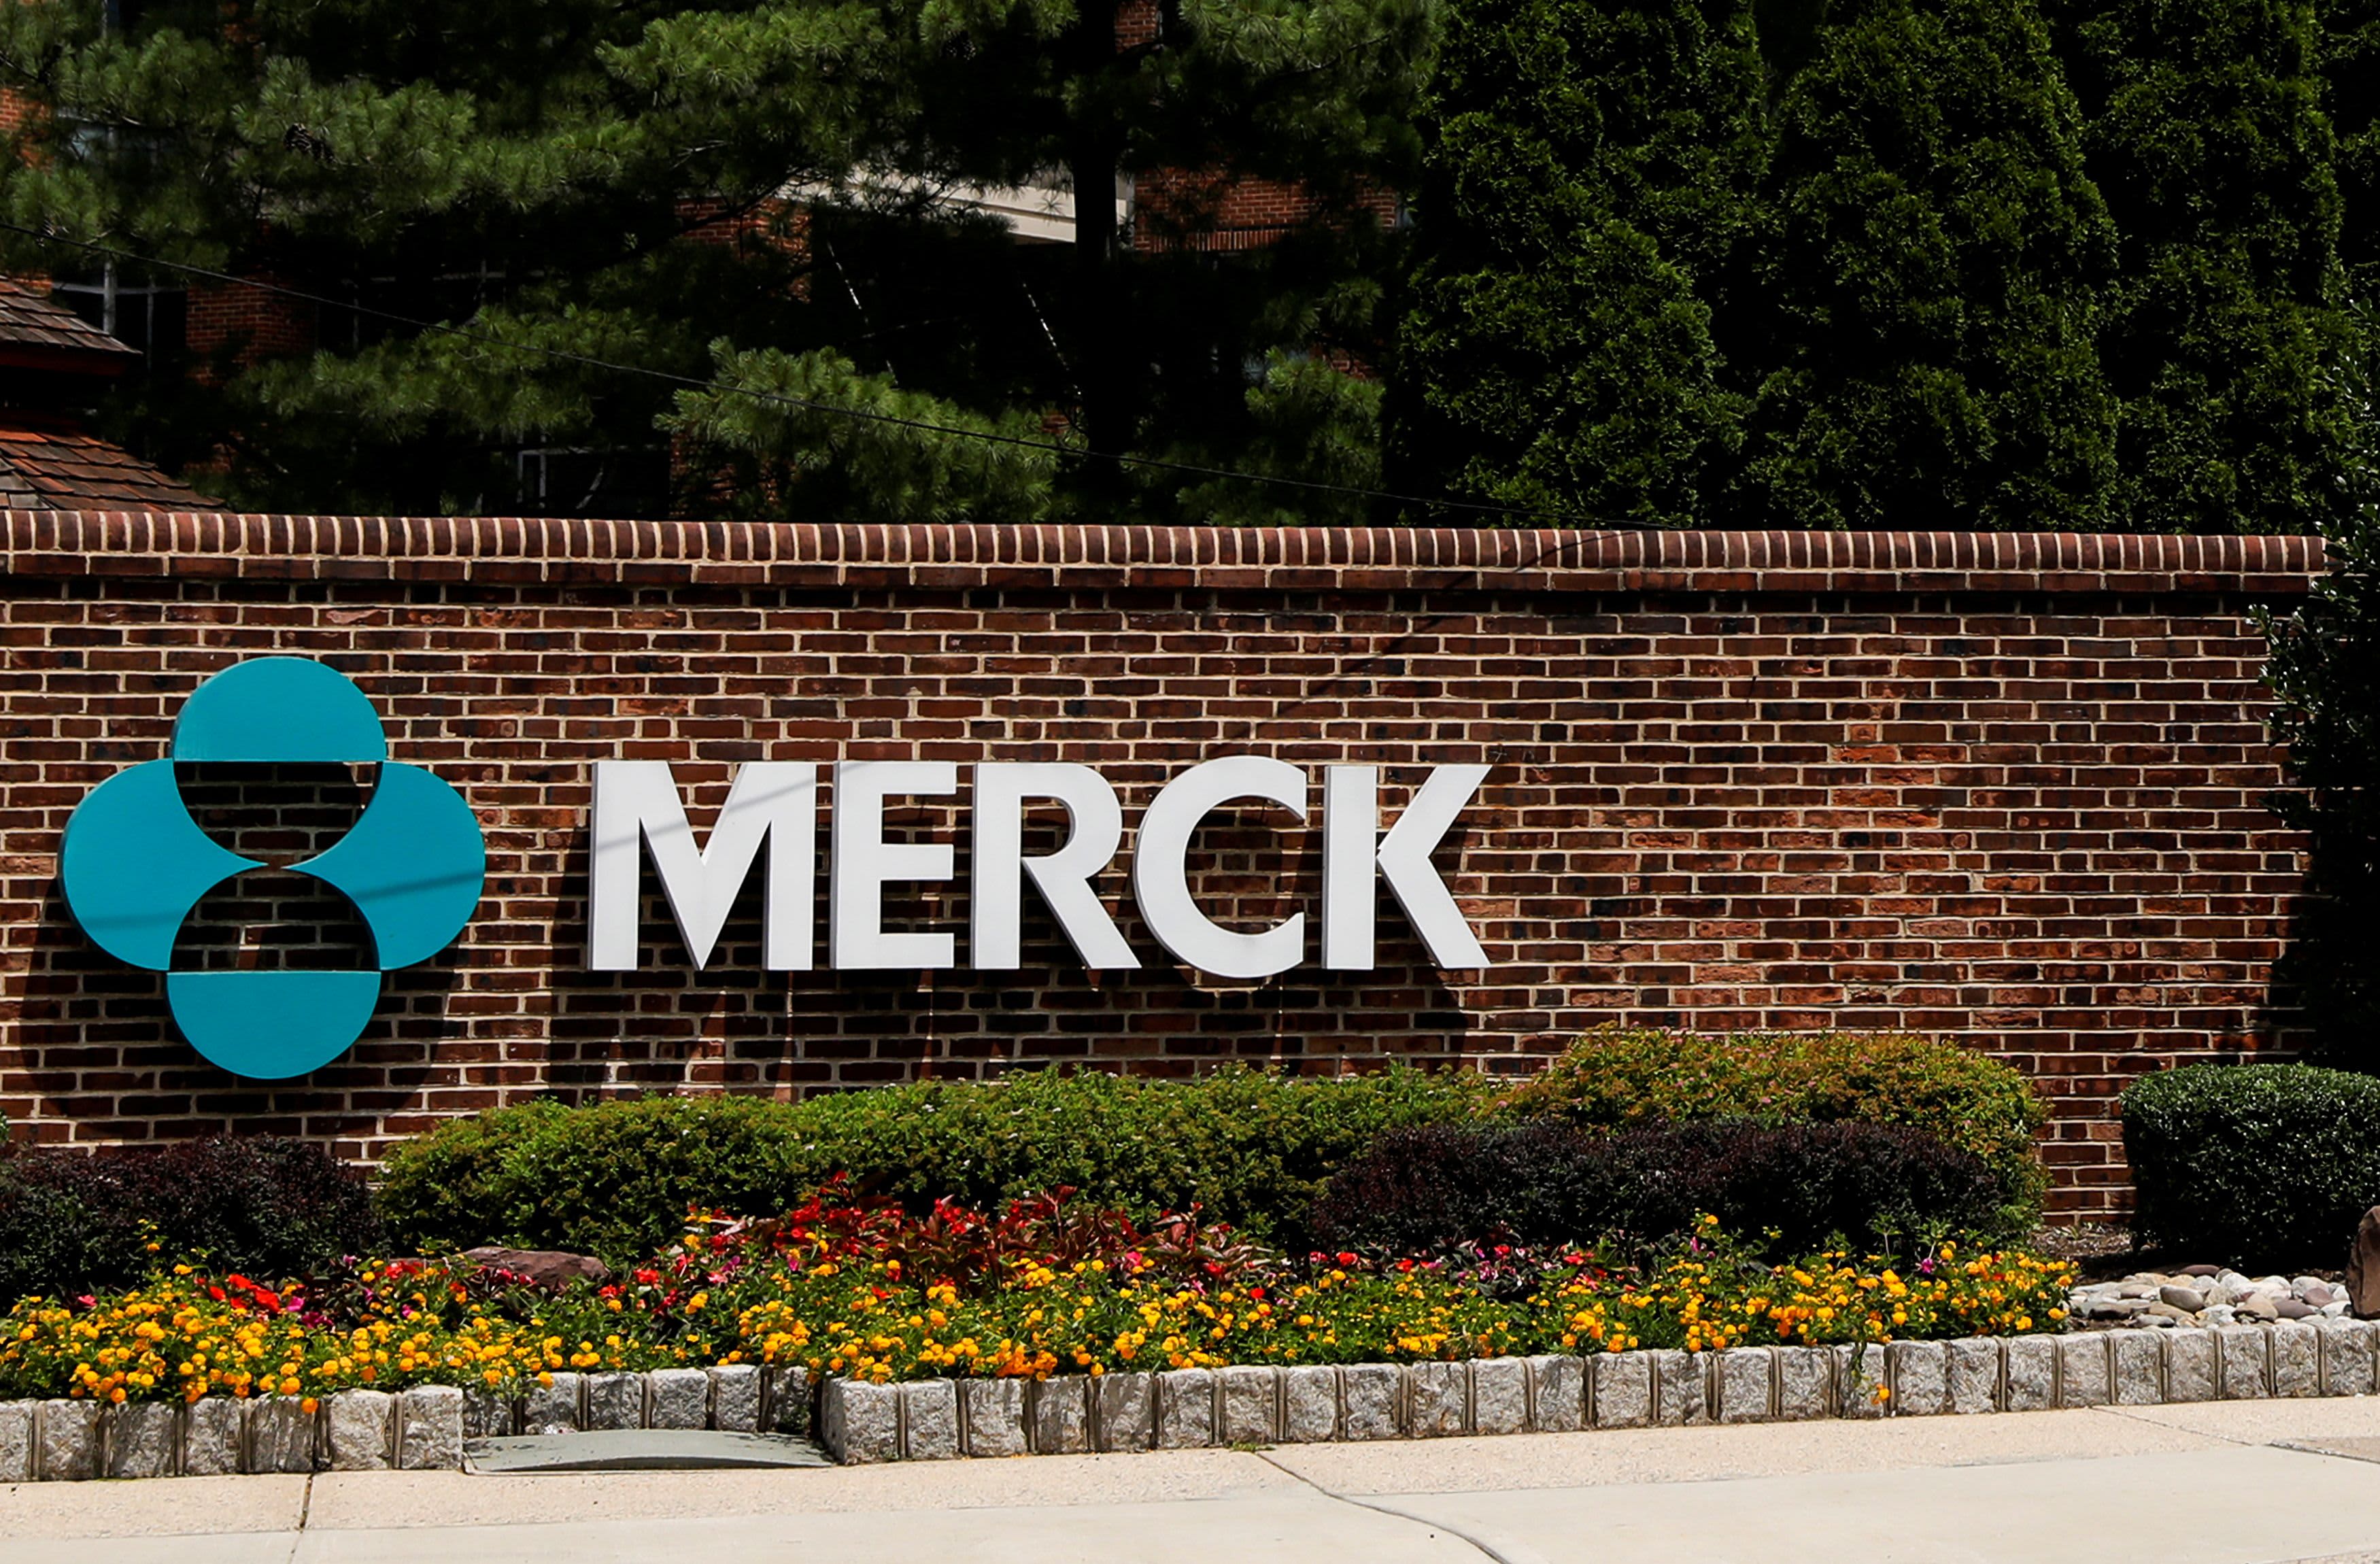 Stocks making the biggest moves premarket: Comcast, Merck, Tempur Sealy, Yum and others